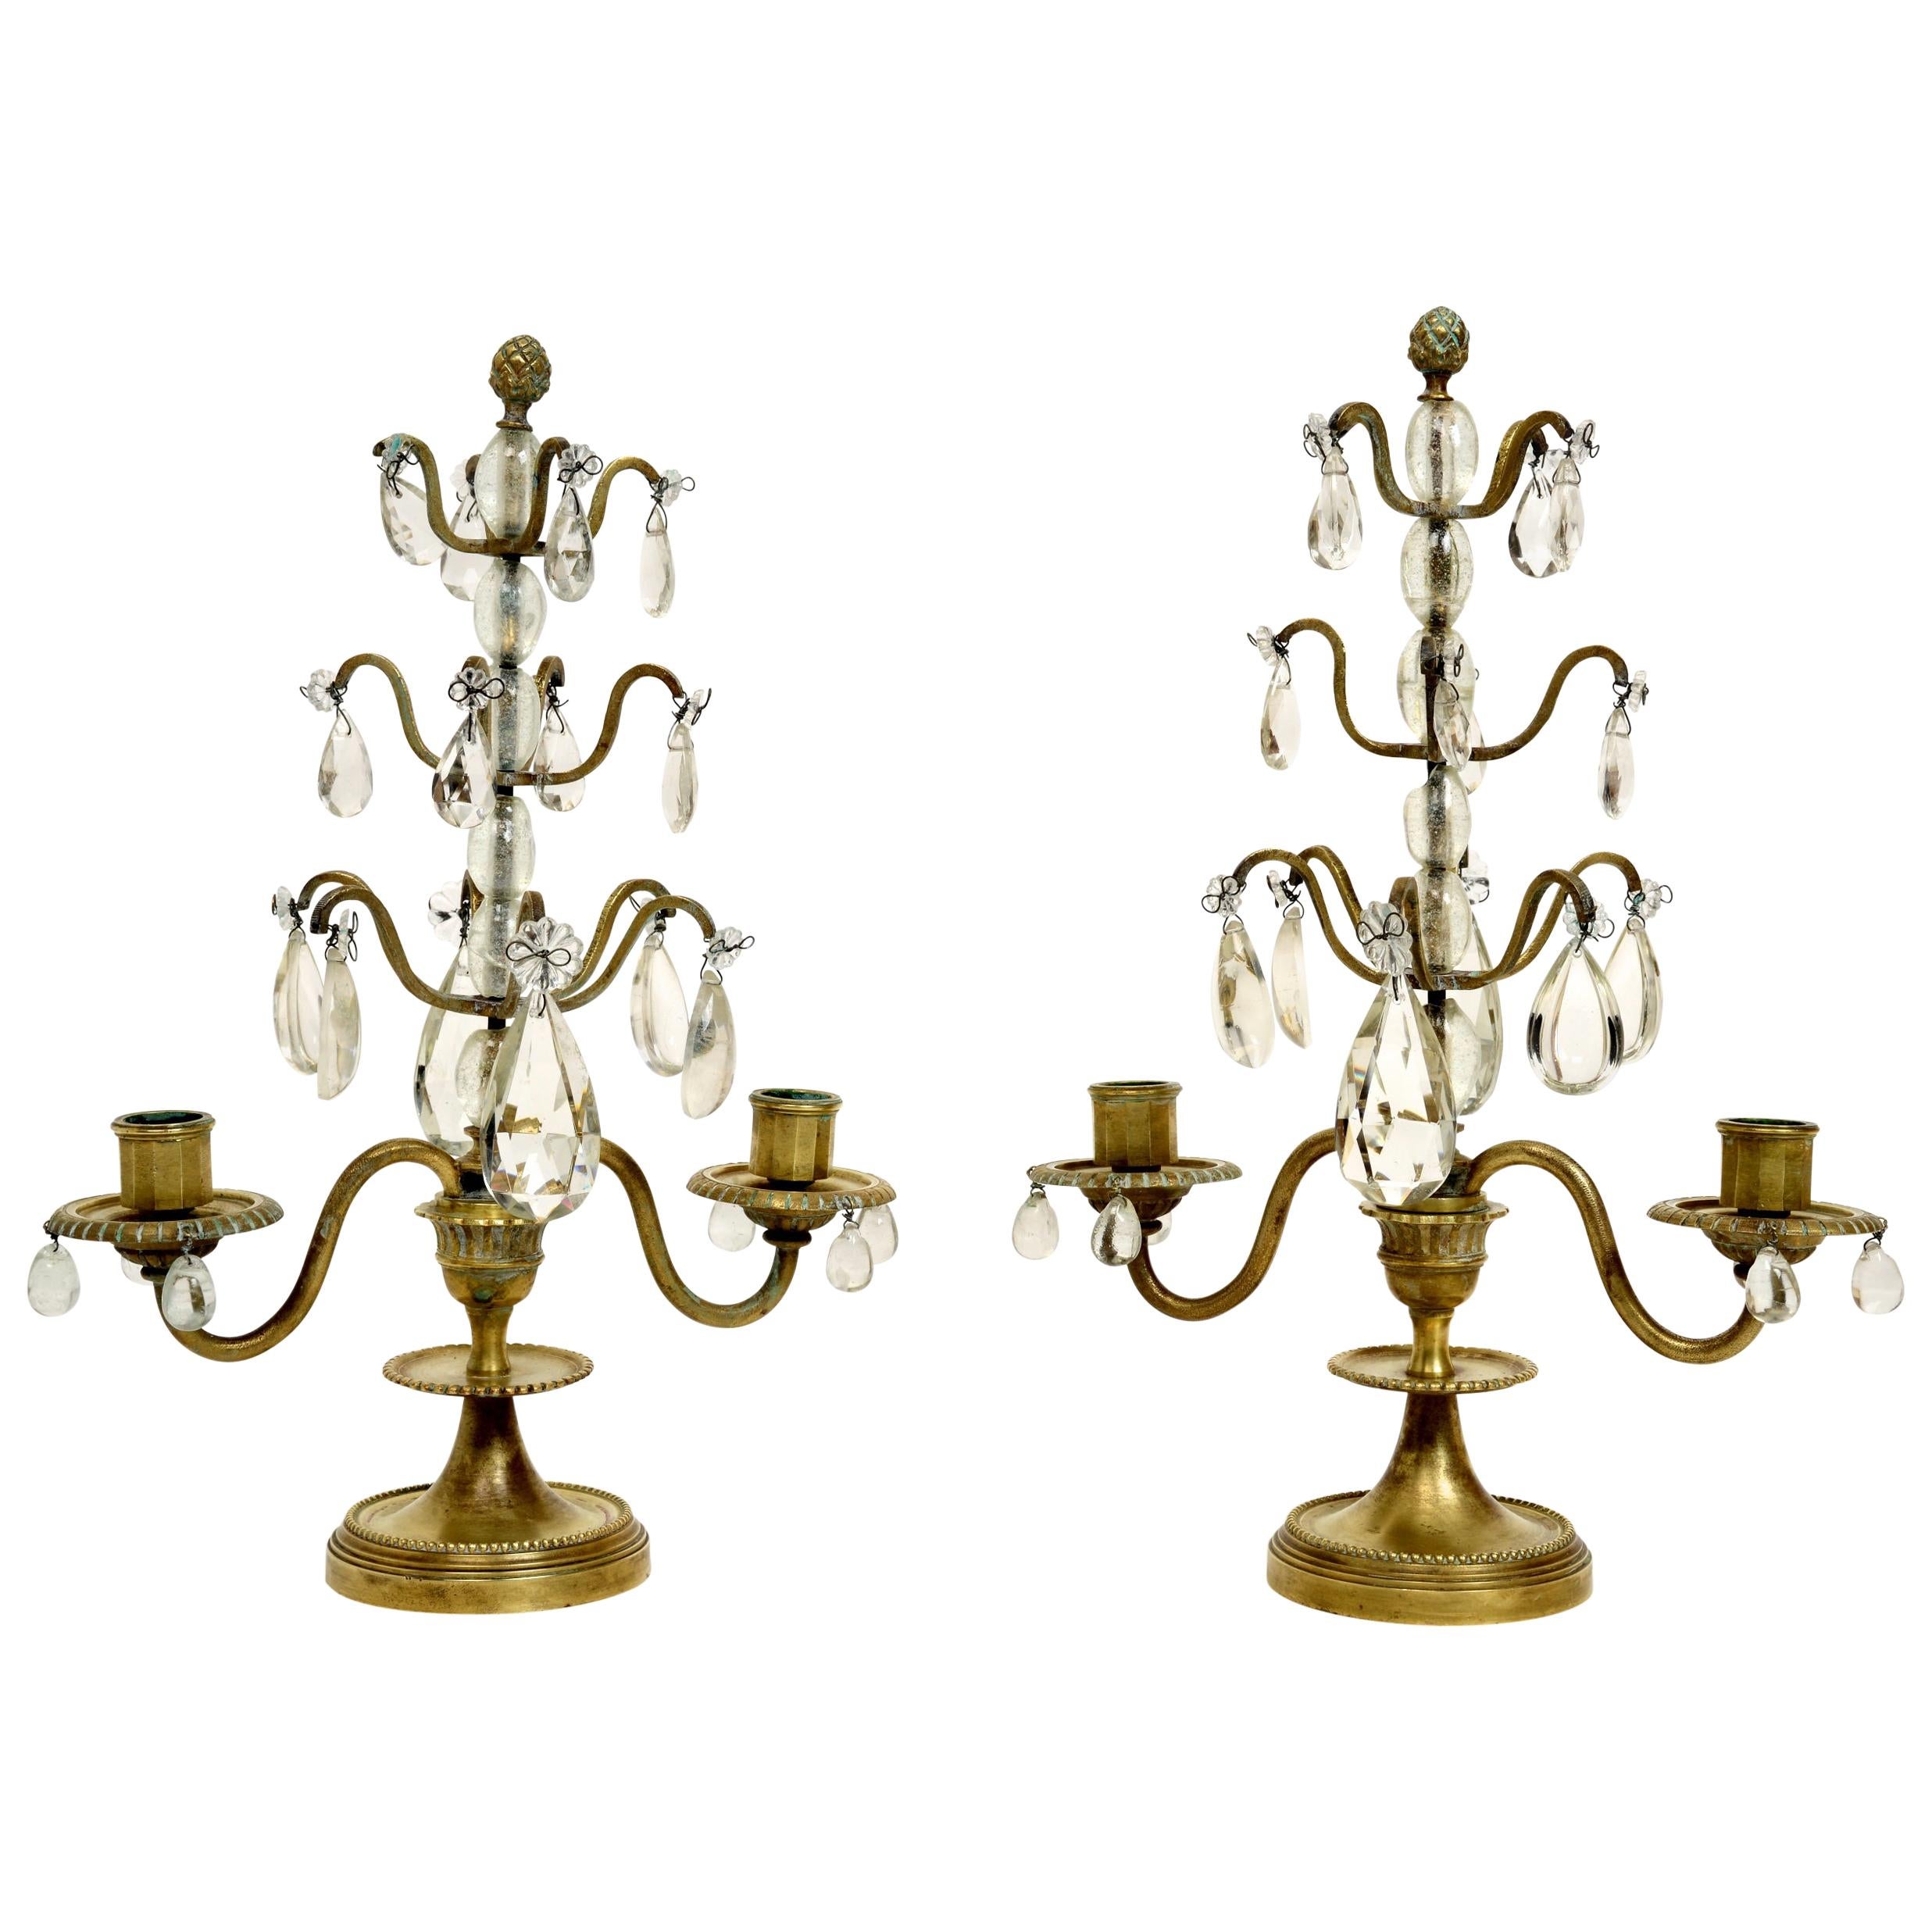 Pair of Rock Crystal, Lead Crystal and Brass Candelabra, Late 19th Century For Sale